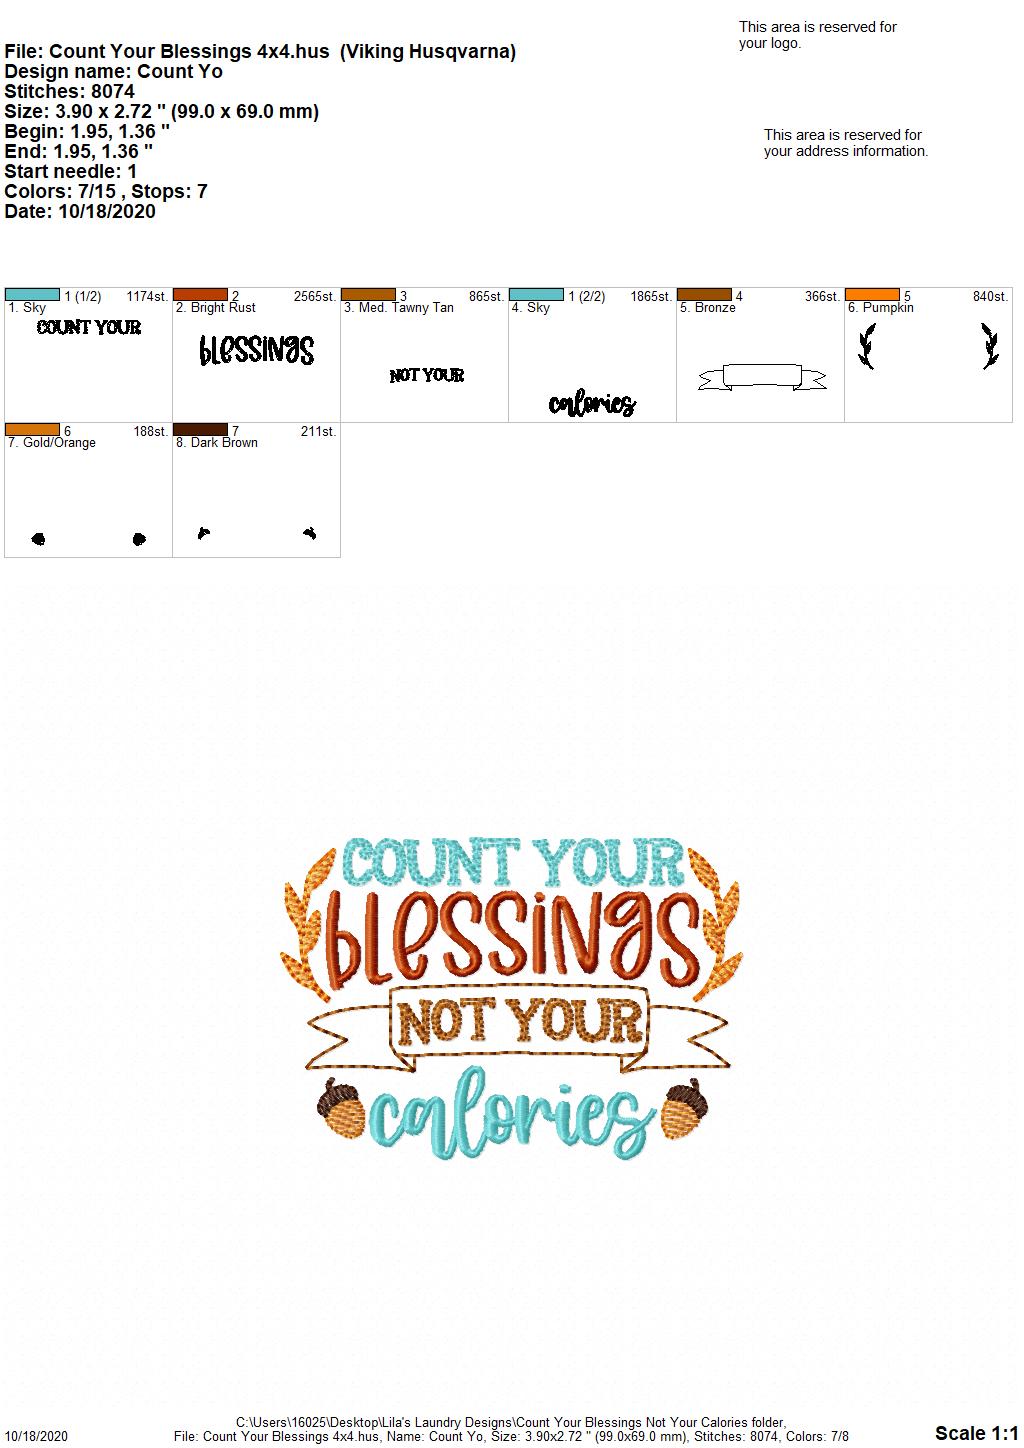 Count Your Blessings Not Your Calories - 3 Sizes - Digital Embroidery Design